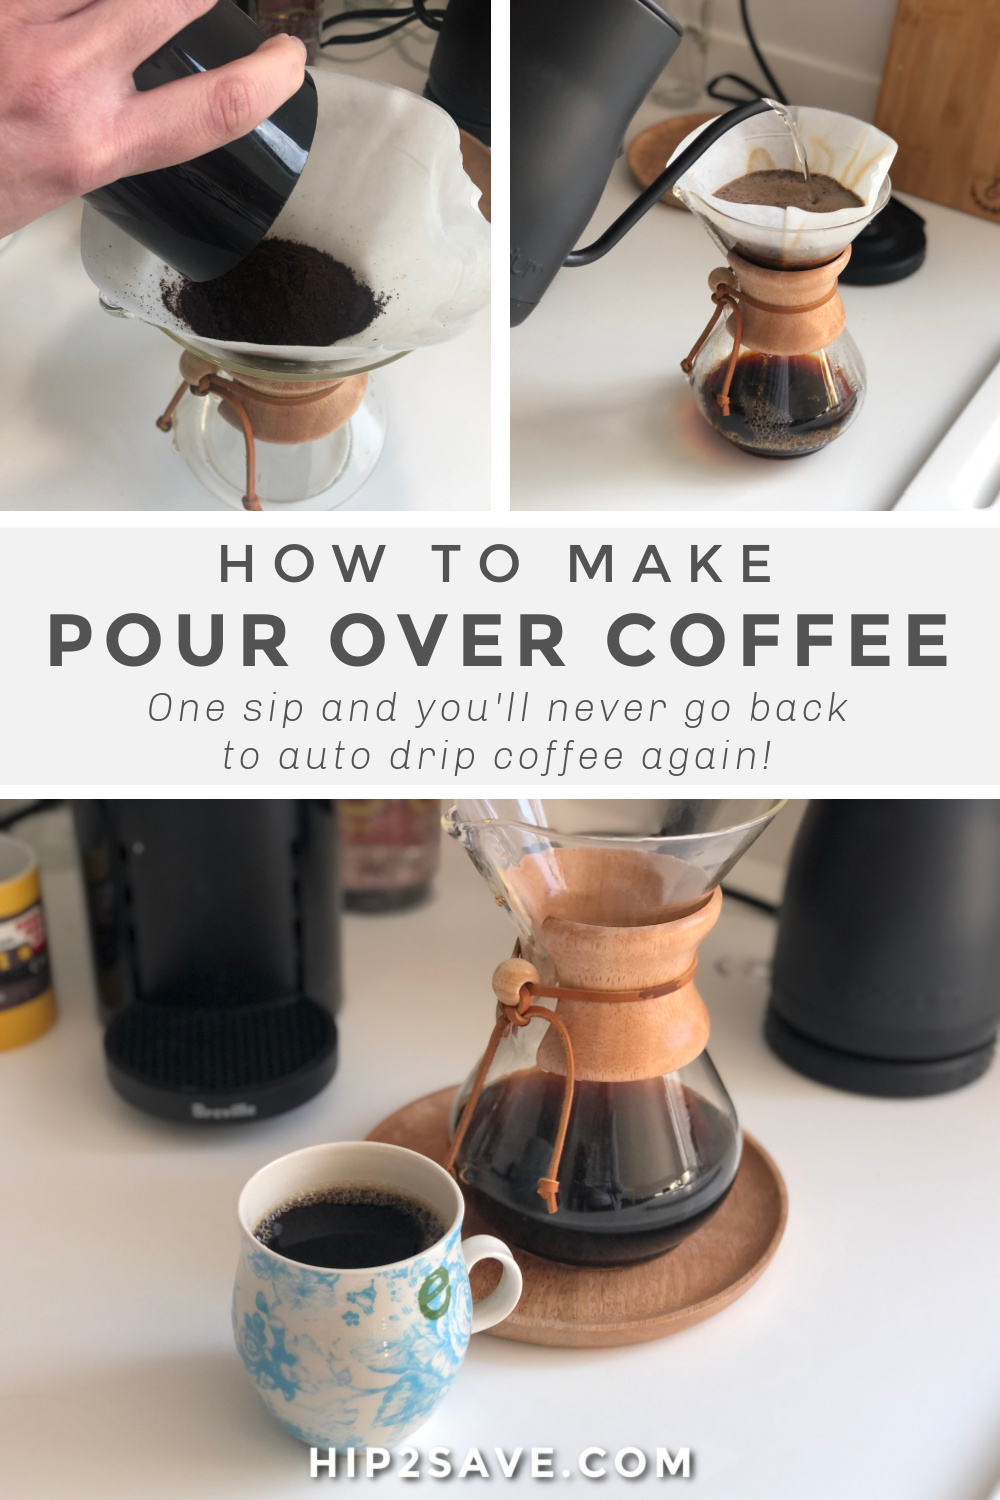 Level up your morning coffee routine #pourovercoffee #pourover